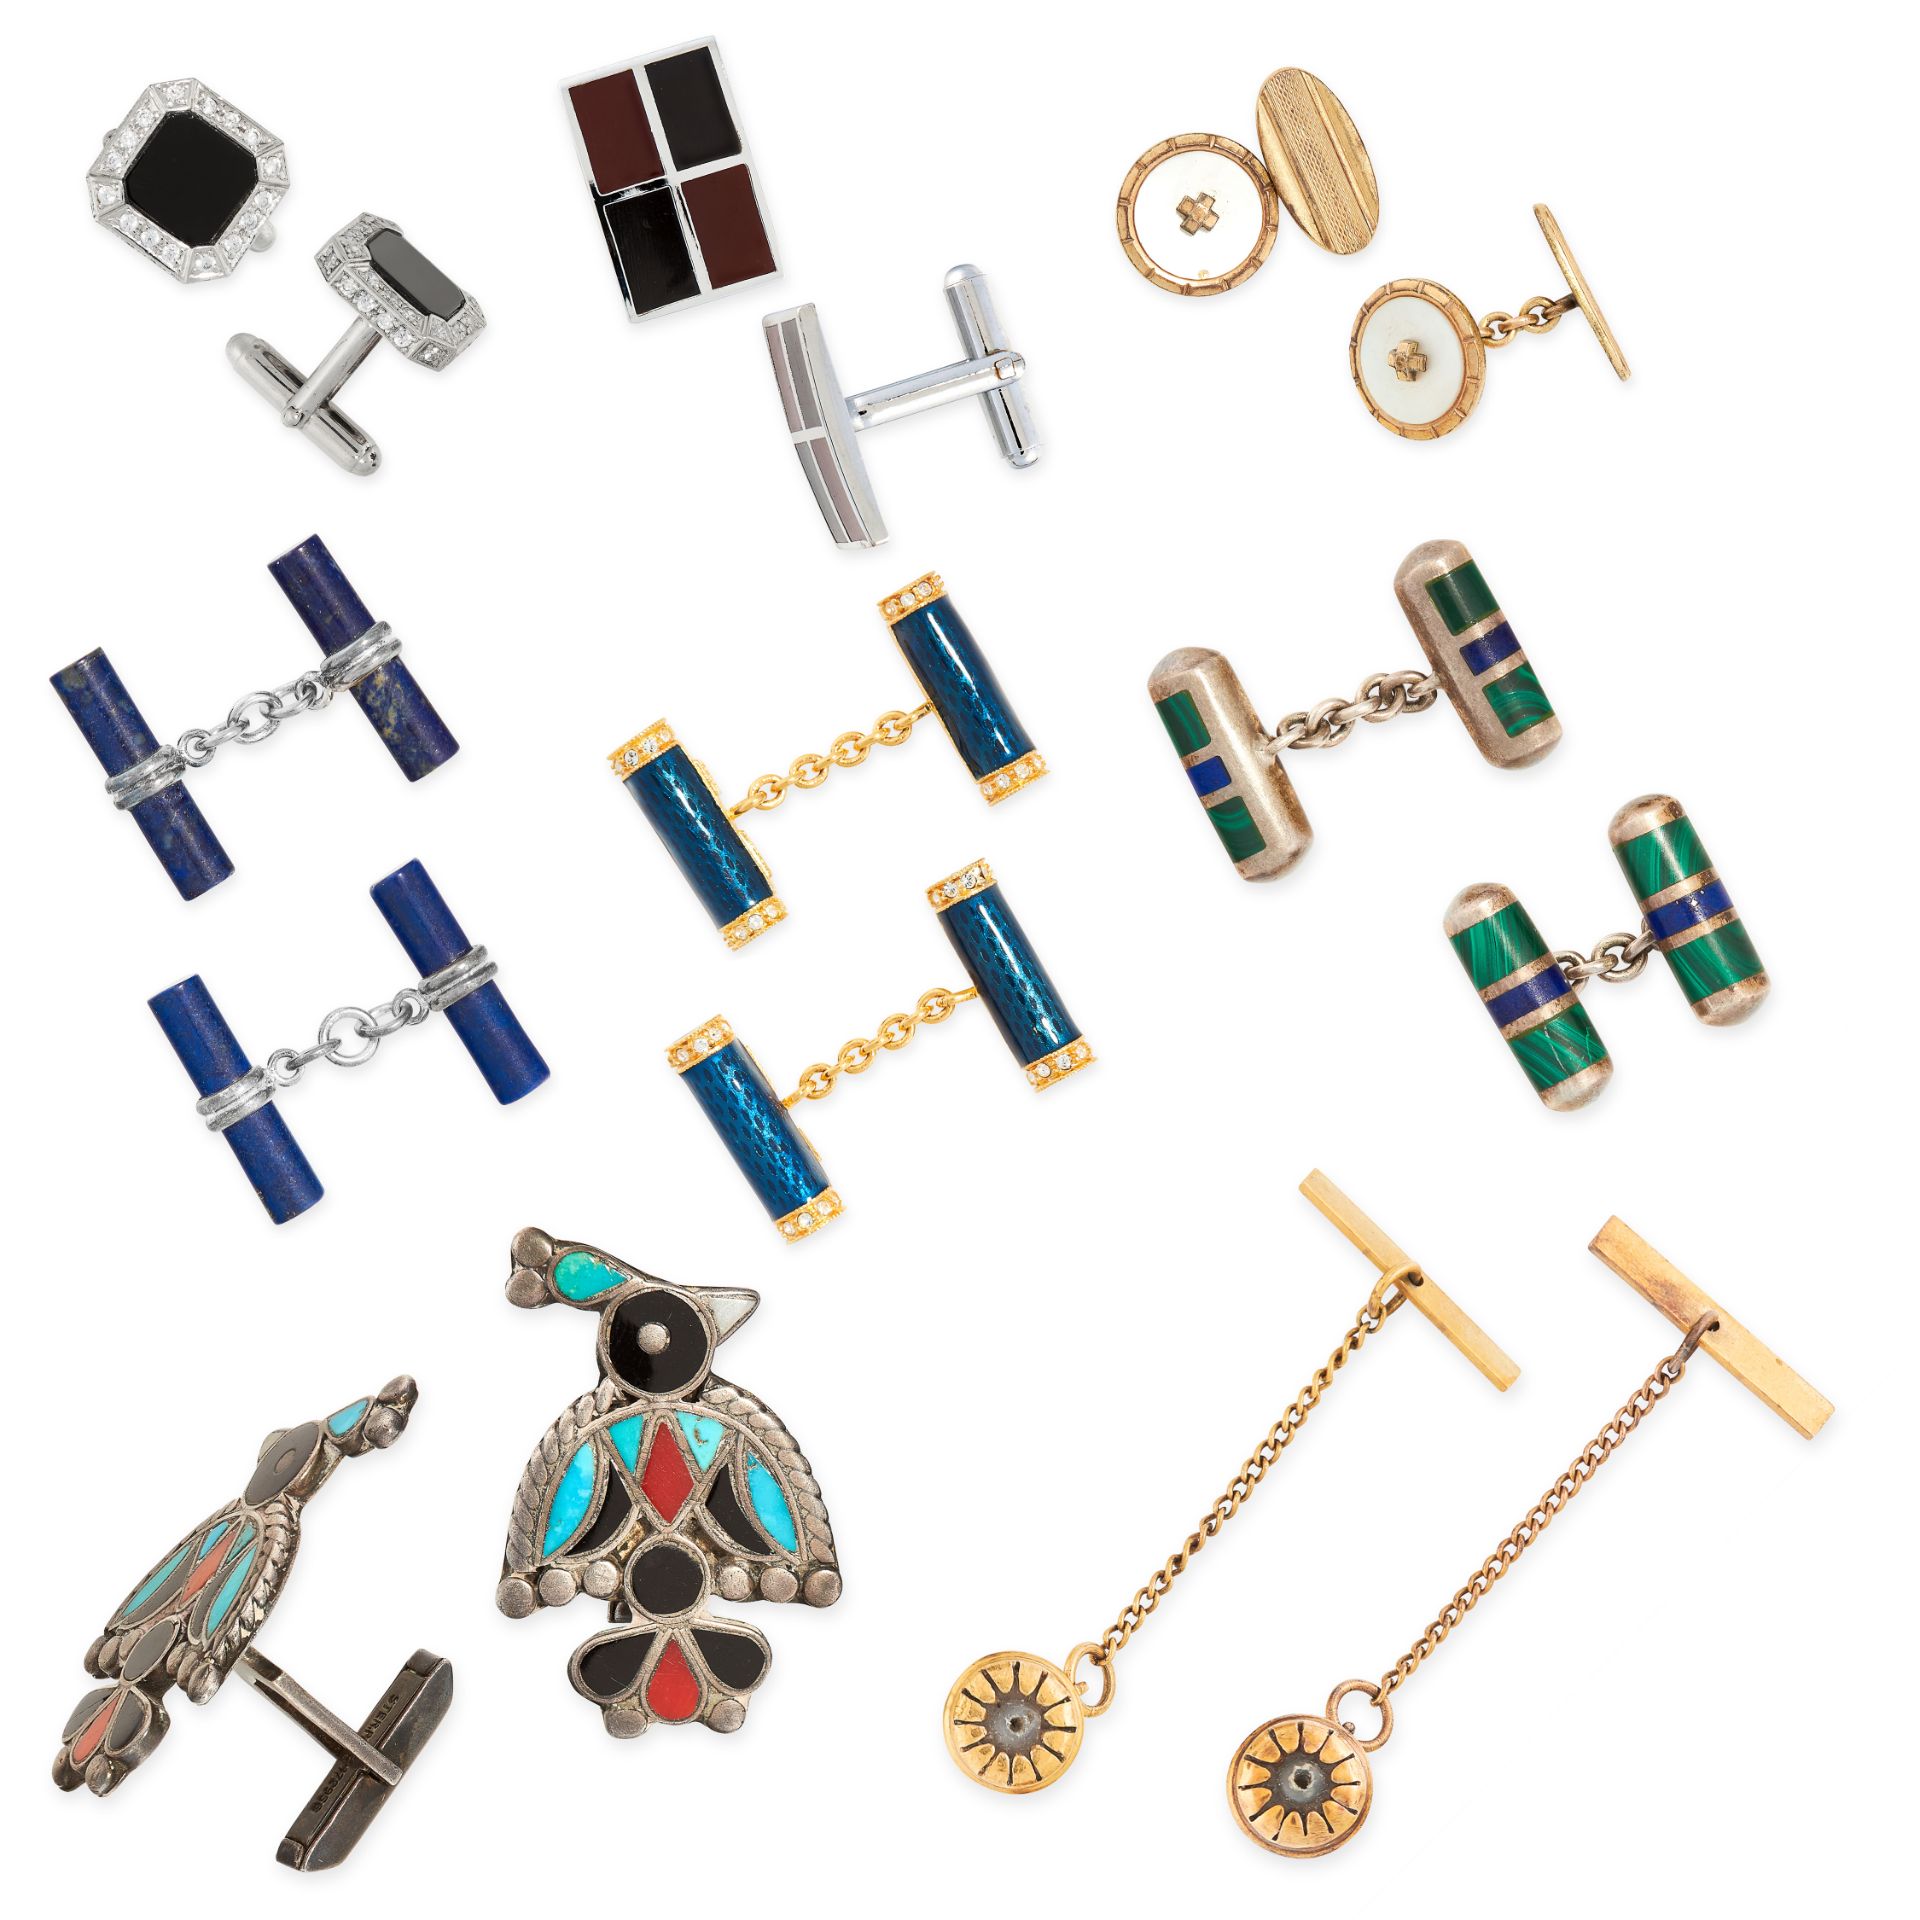 MIXED LOT OF GEMSET CUFFLINKS AND BUTTONS comprising of seven pairs of cufflinks and one pair of